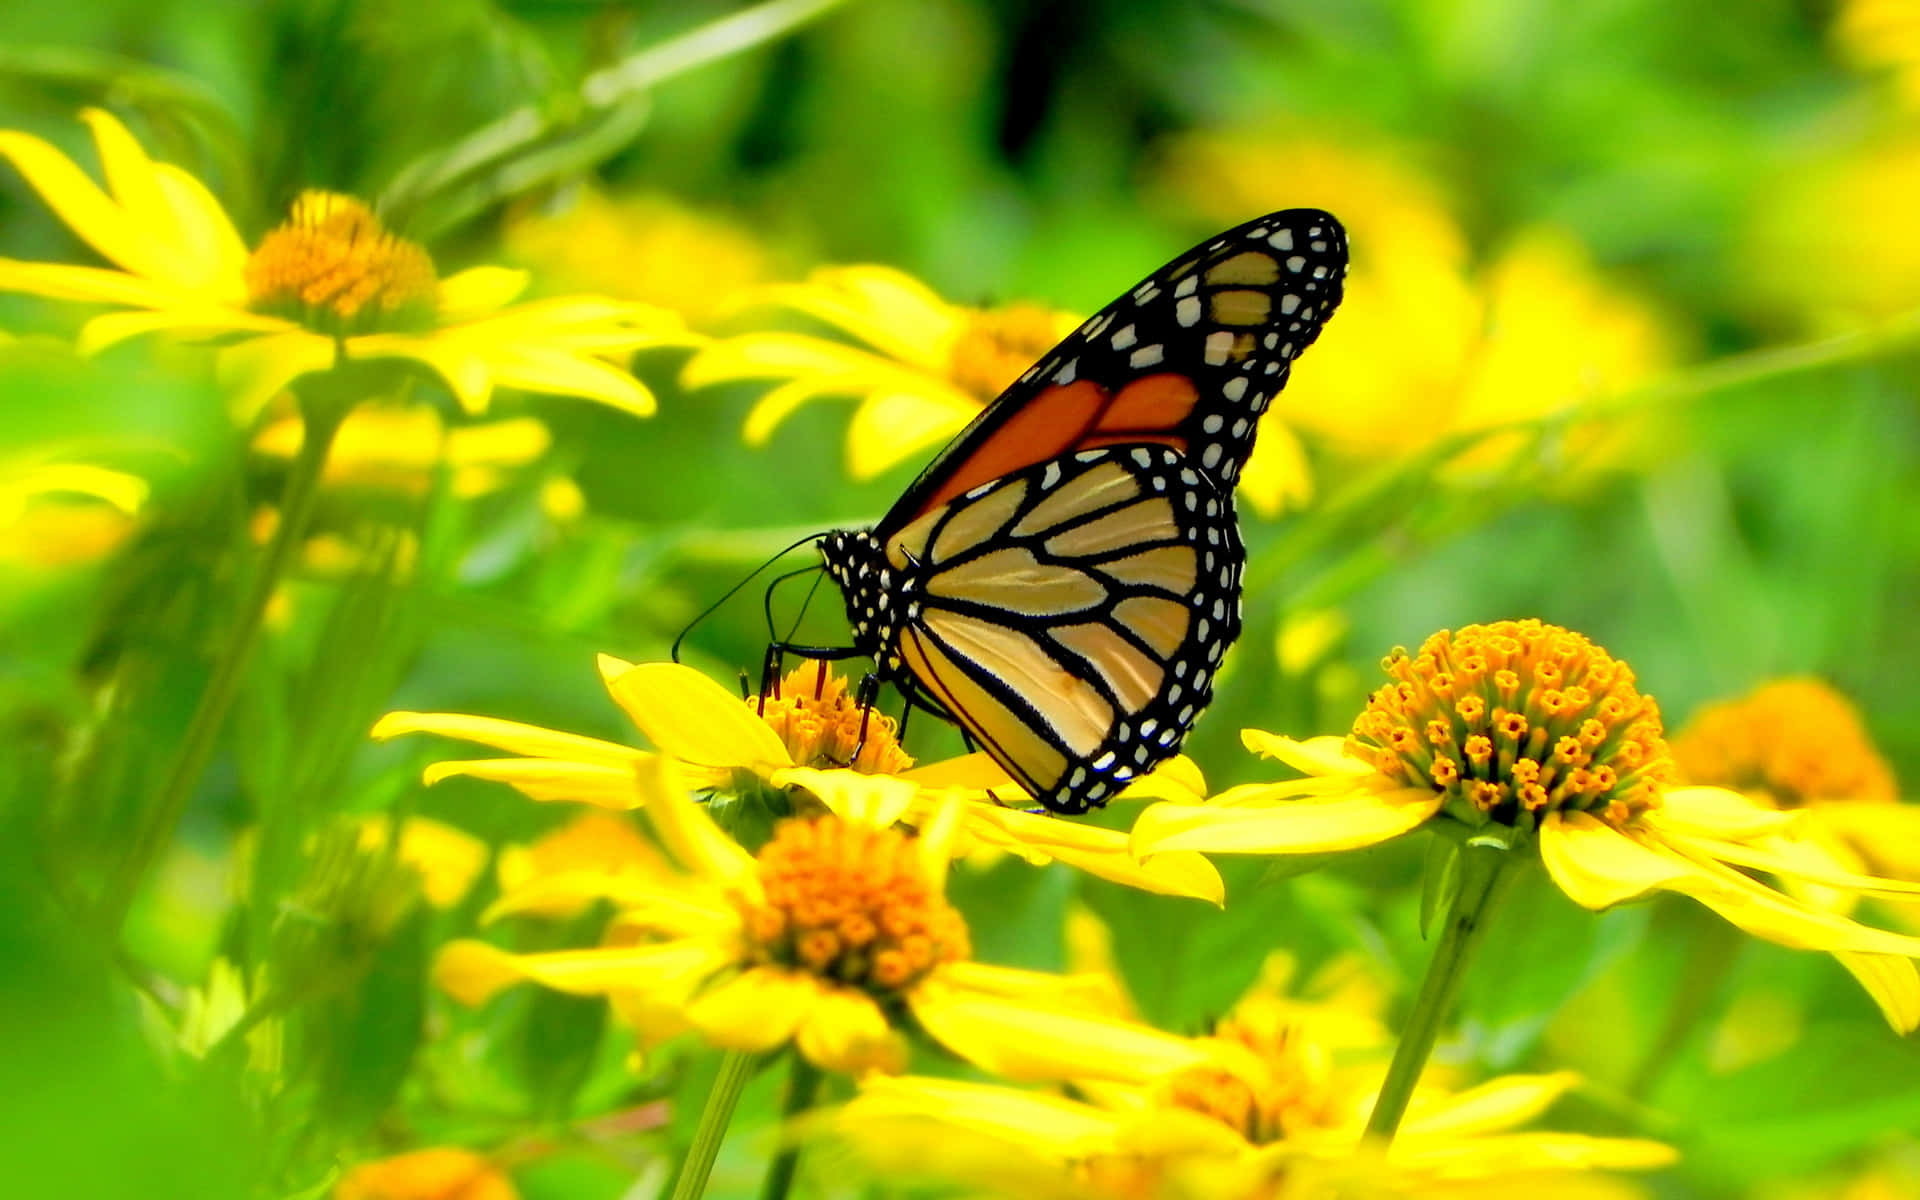 Come explore the Butterfly Zoo and its lush wildlife Wallpaper